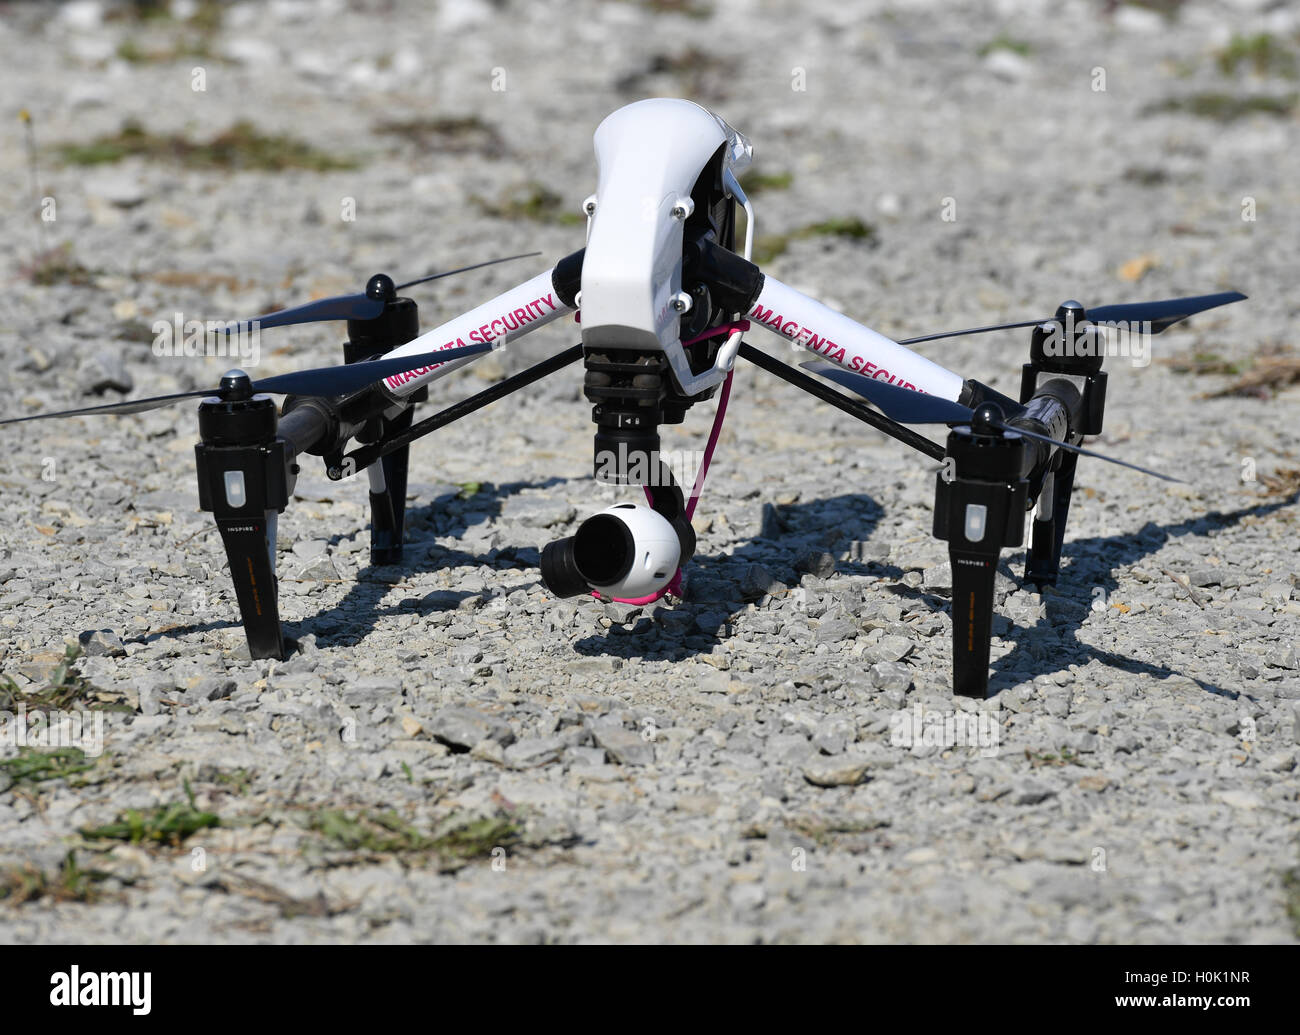 Biere, Germany. 12th Sep, 2016. A drone of Telekom with the inscription 'Magneta Telekom' can be seen the grounds at the laying of the first stone for the expansion of the Cloud-Rechenzentrum of Deutsche Telekom in Biere, Germany, 12 September 2016. Photo: Jens Kalaene/dpa/Alamy Live News Stock Photo